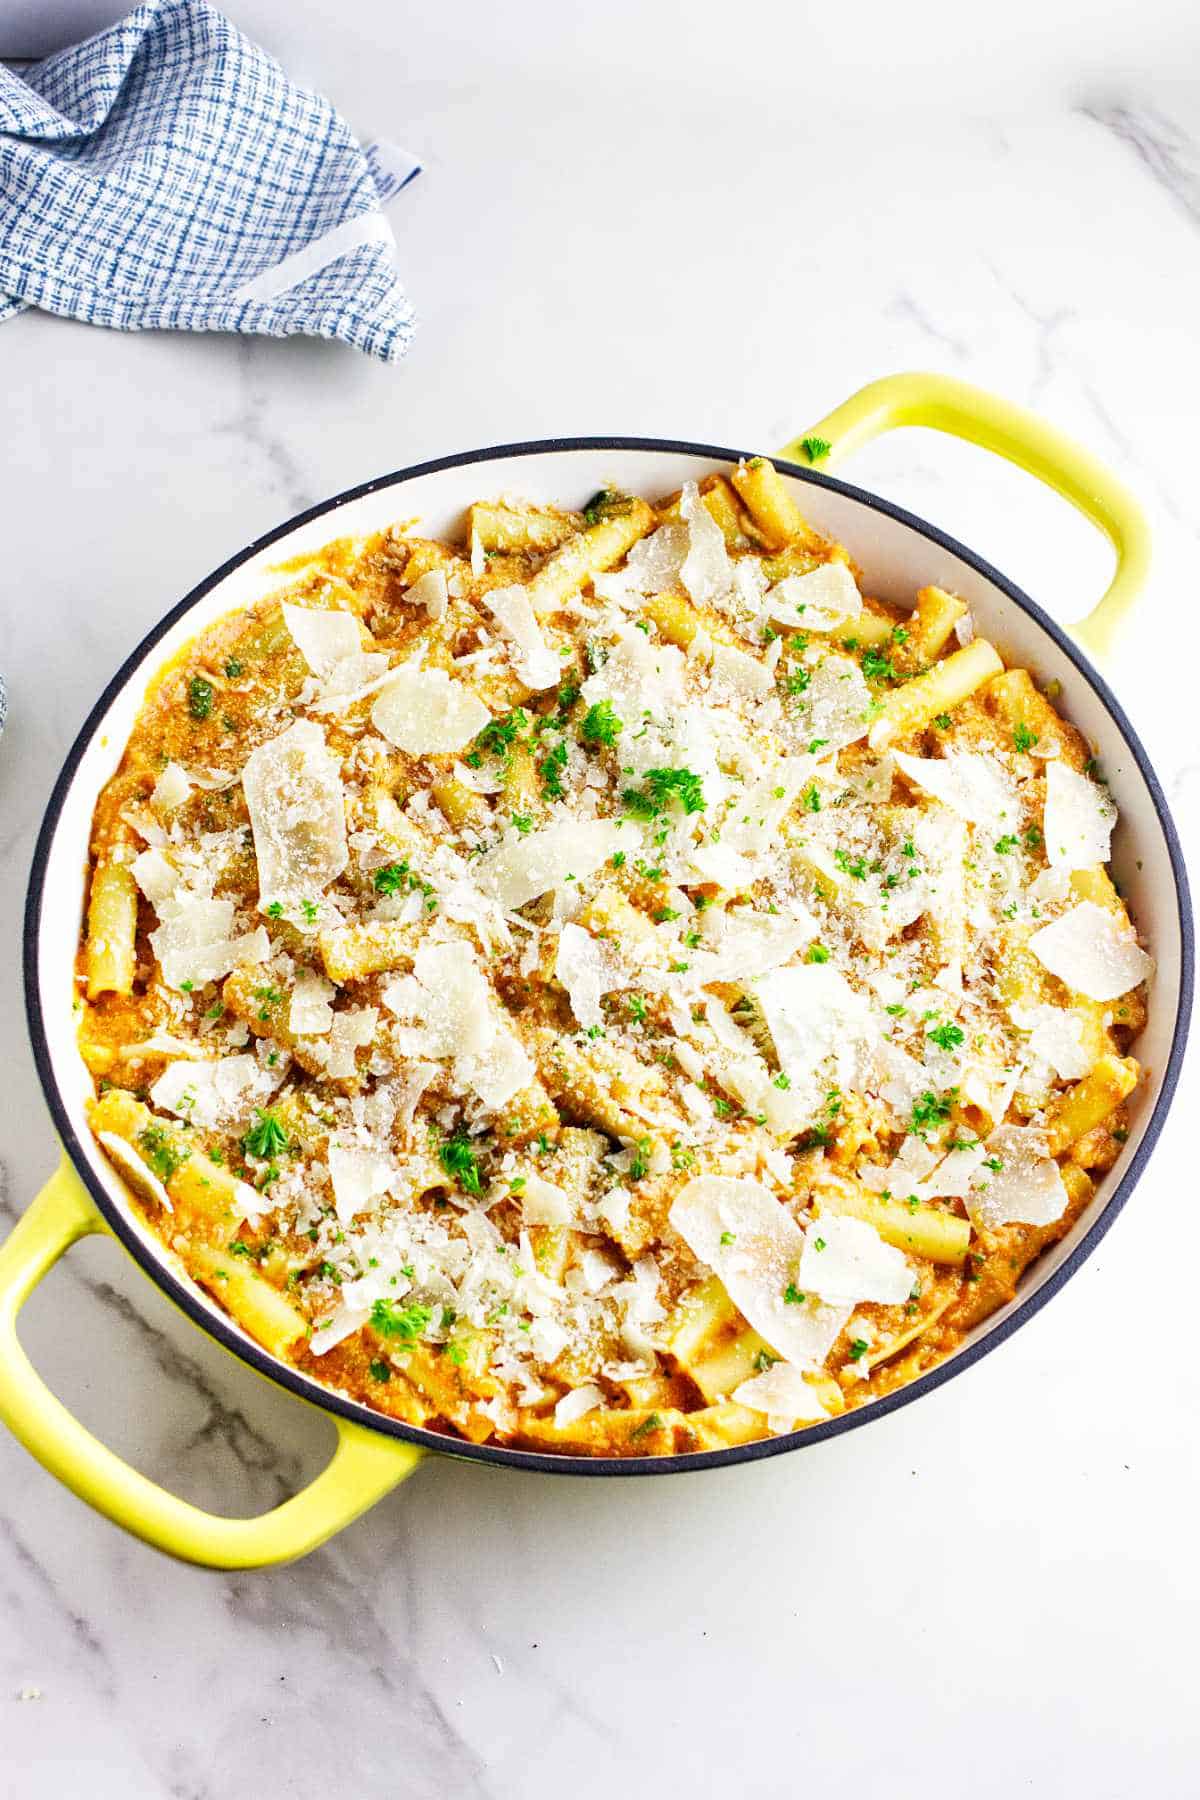 shredded parmesan cheese and parsley garnishing the top of a baked ziti casserole.